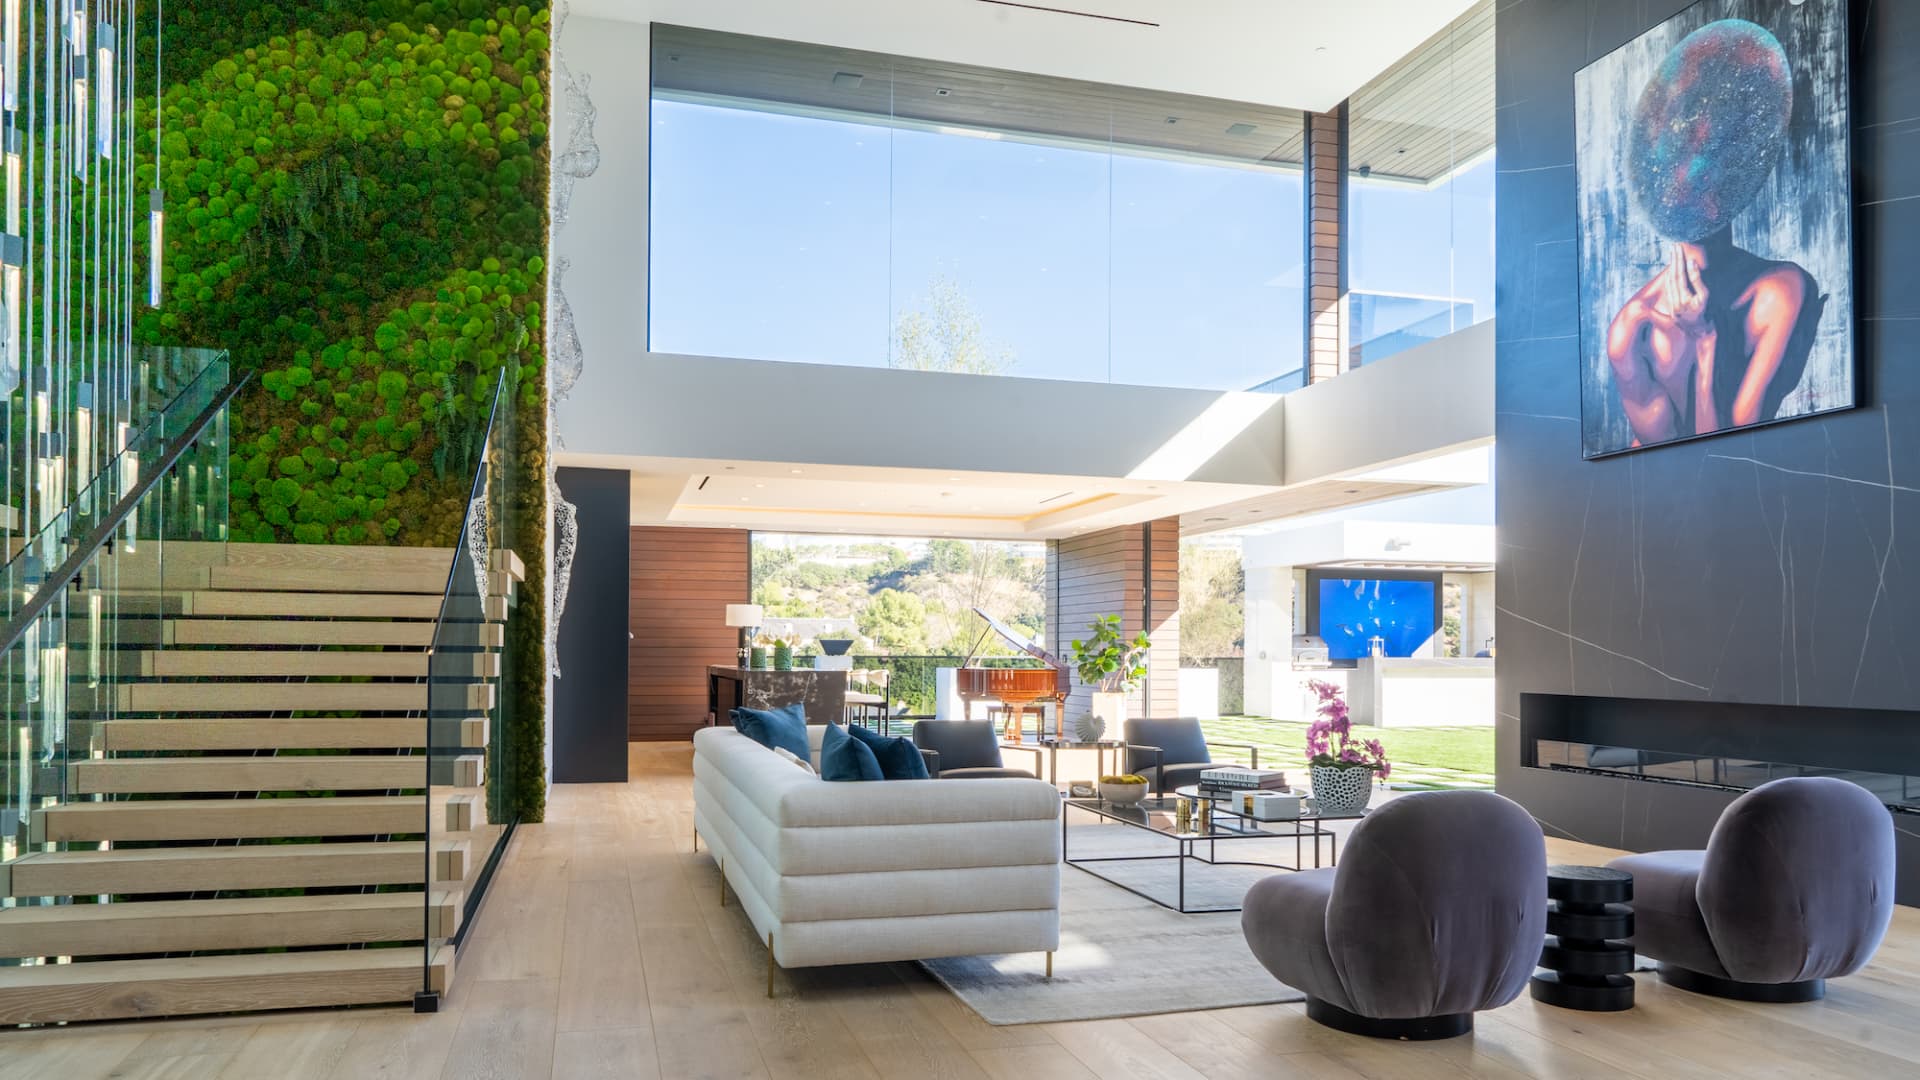 The home's impressive foyer includes double height ceilings and glass walls that open to the pool deck and outdoor bar.